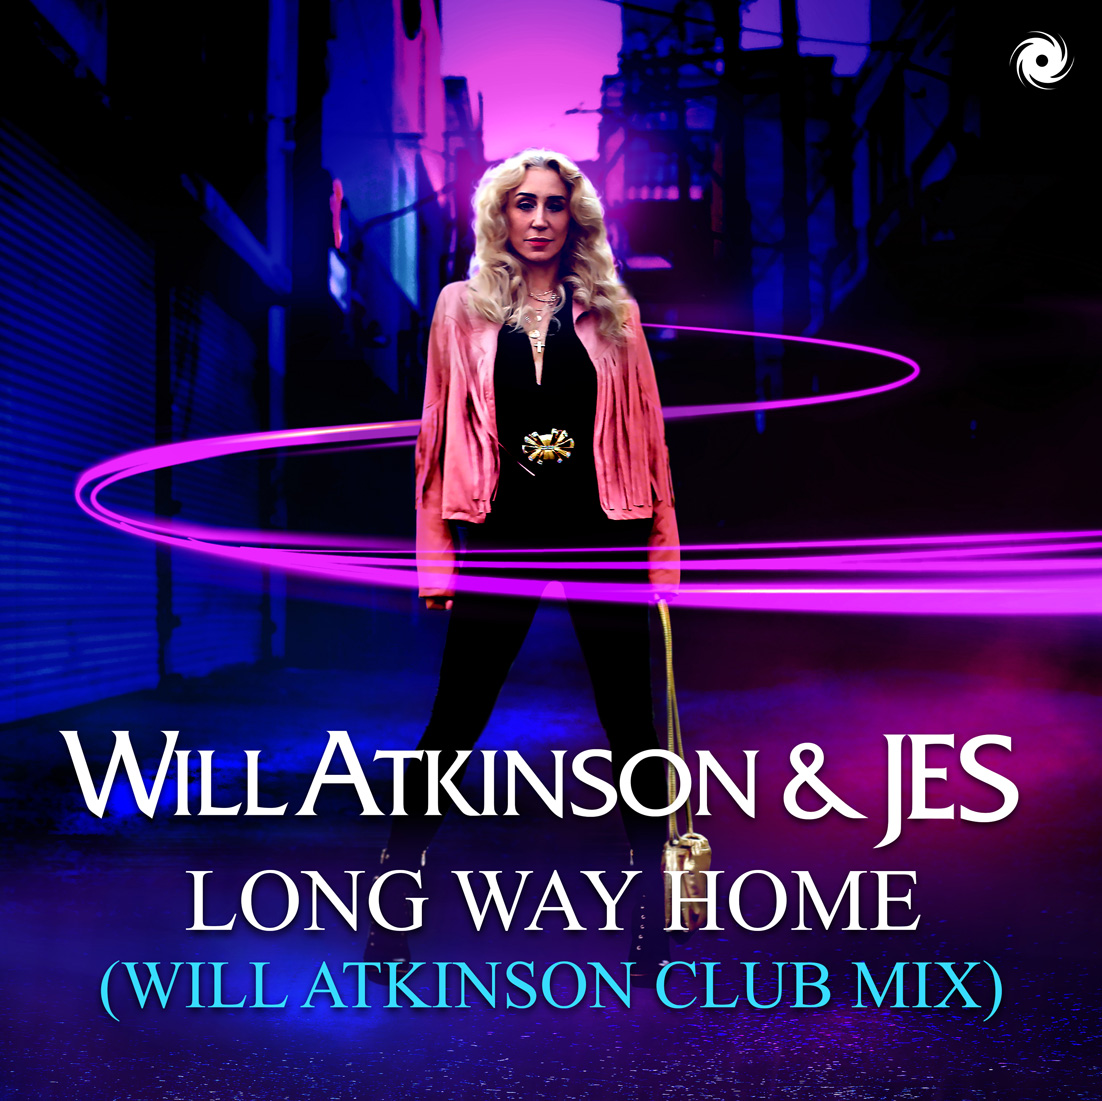 Will Atkinson and JES presents Long Way Home (Will Atkinson Club Mix) on Black Hole Recordings